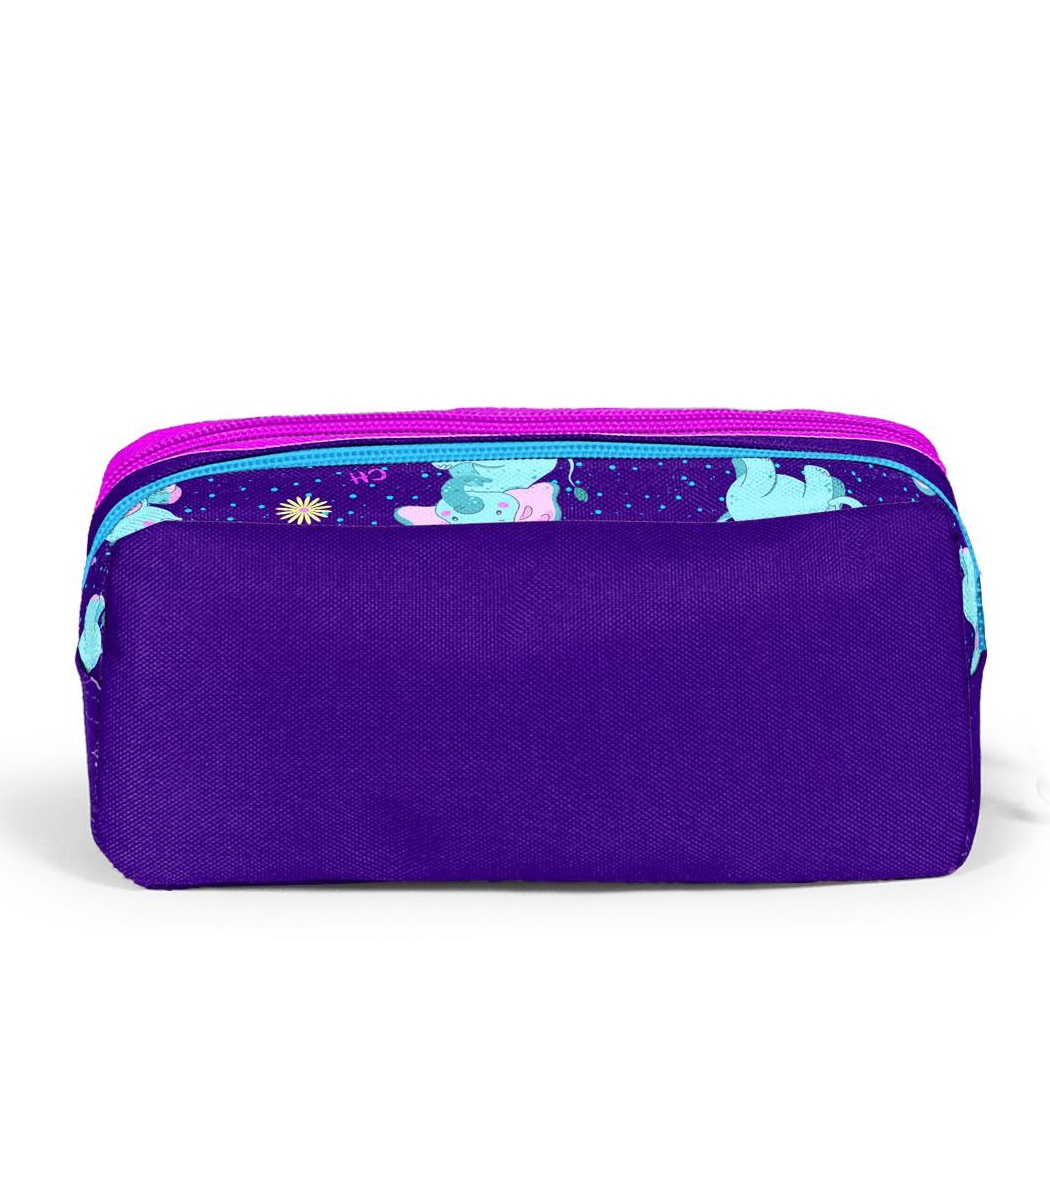 Coral High Kids Two Compartment Pencil case - Purple Pink Elephant Patterned